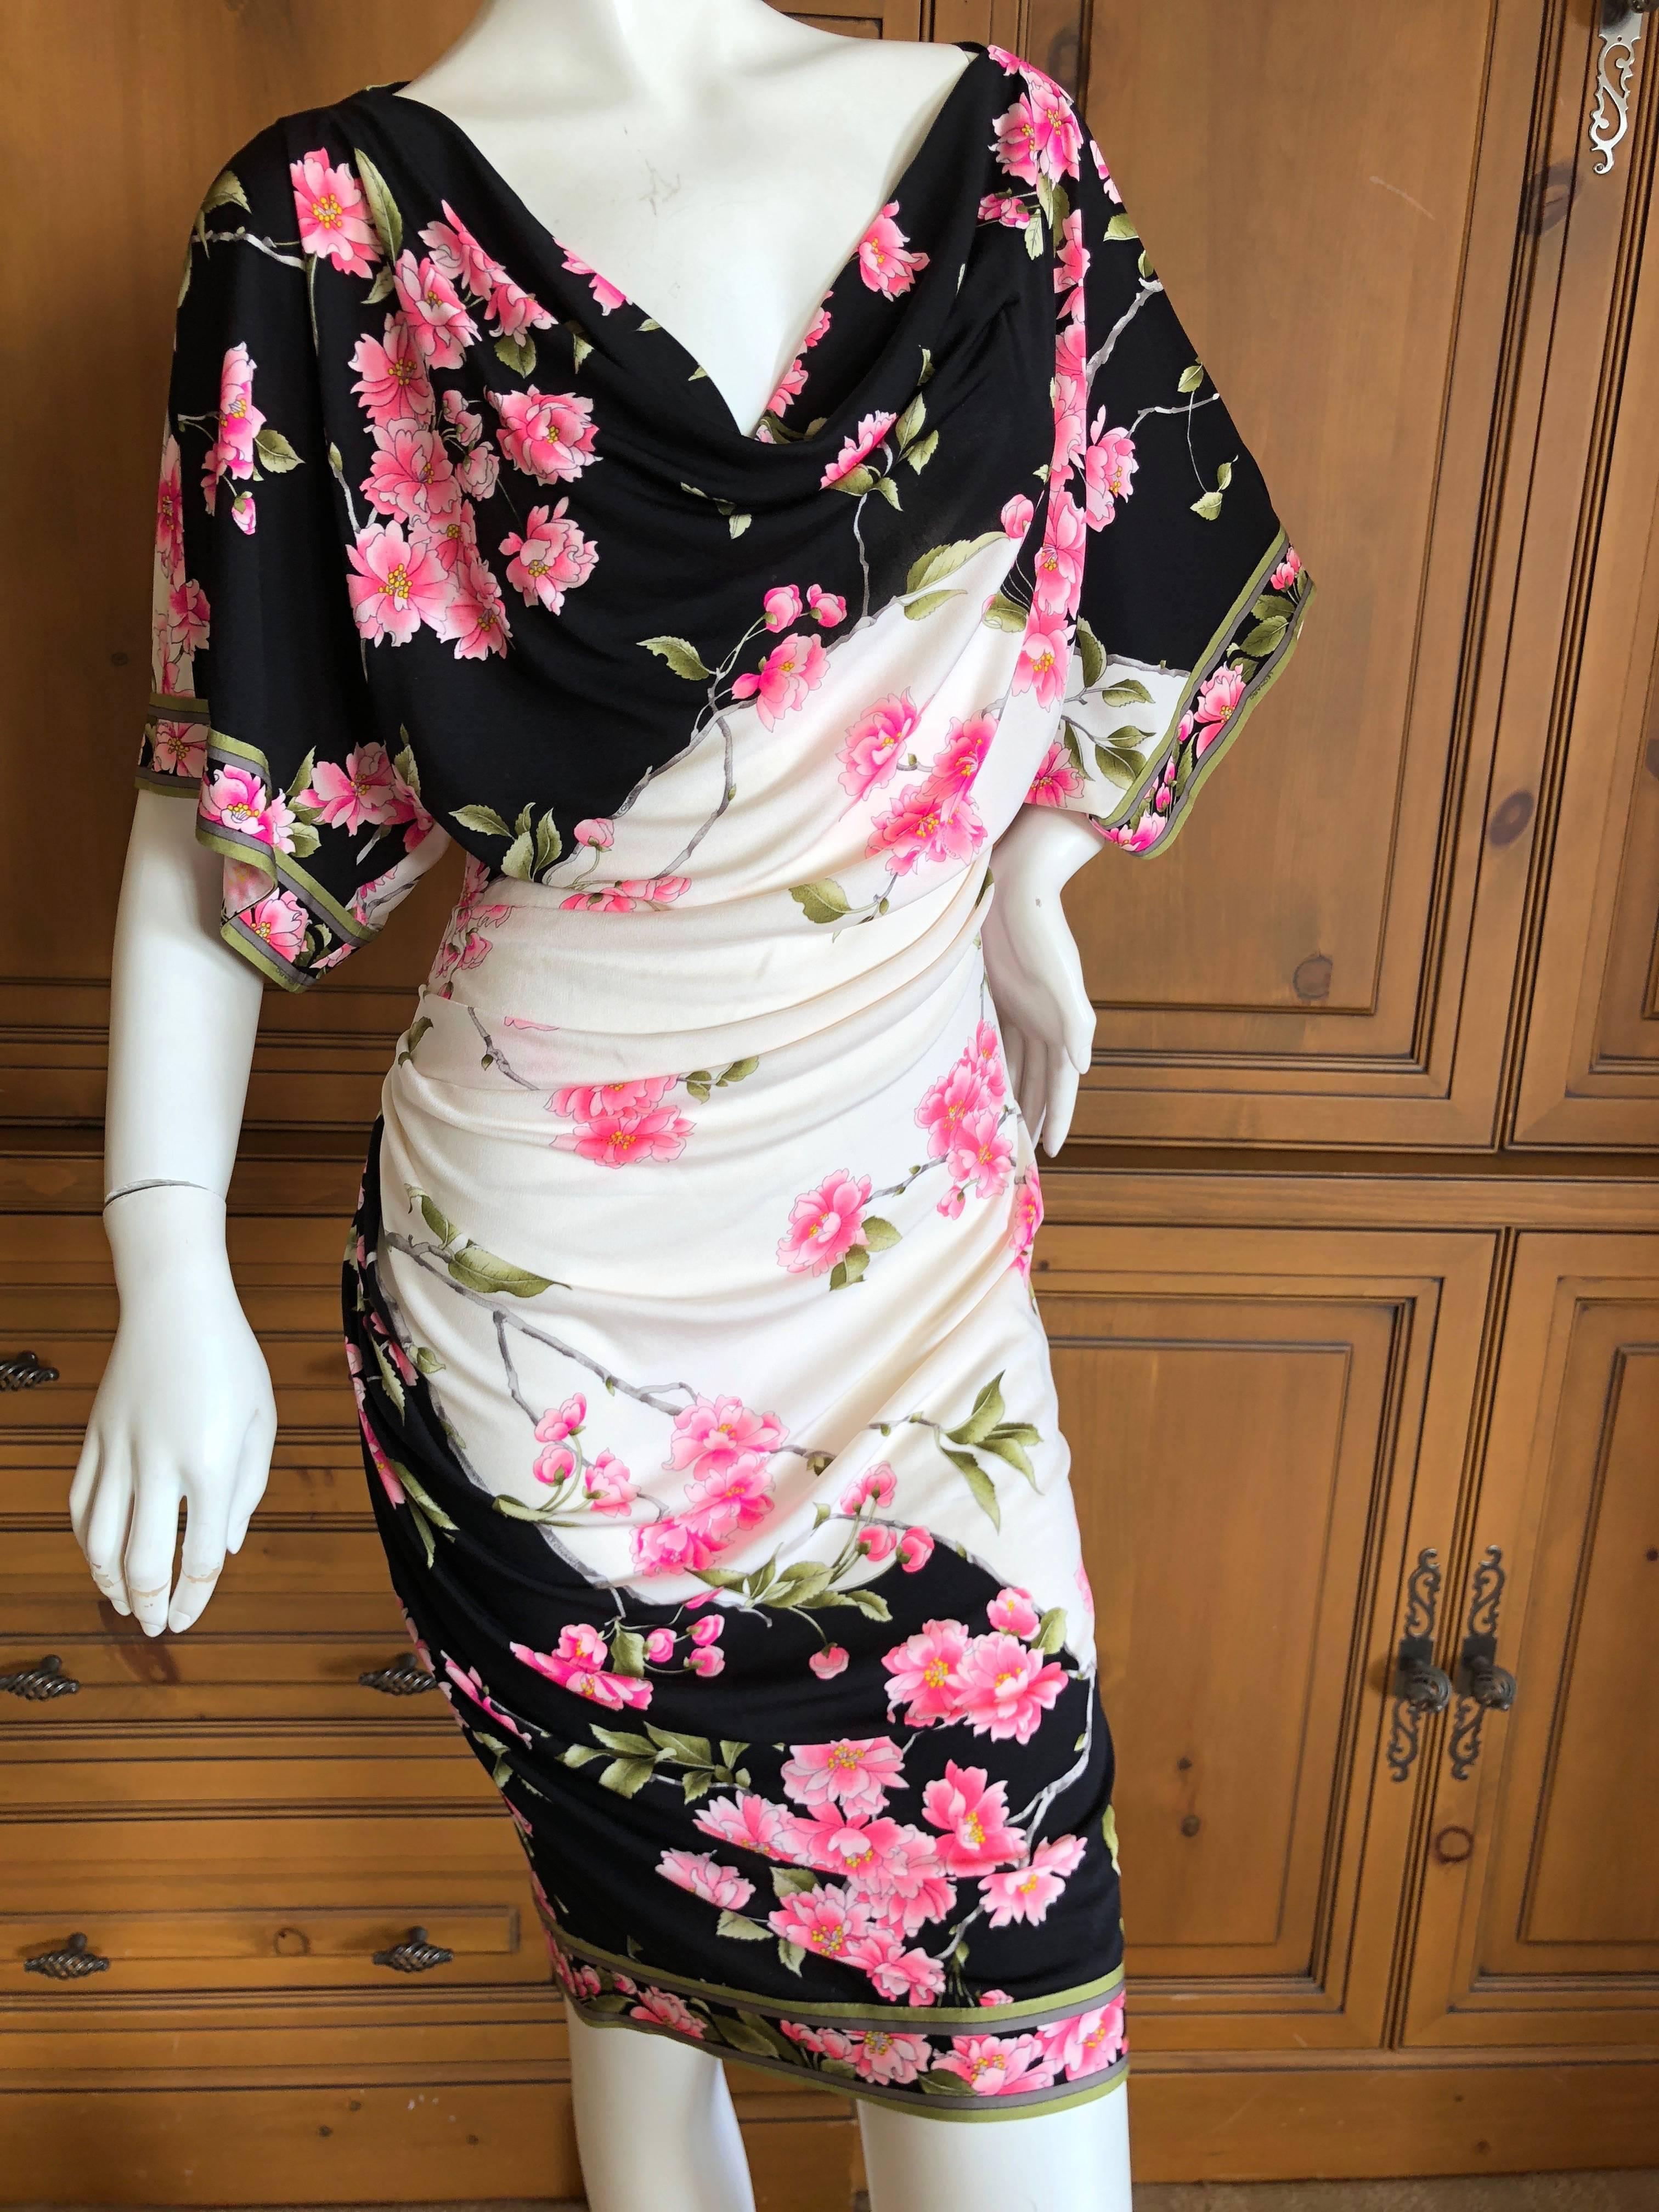 Lovely floral print silk jersey dress from Leonard Paris .
Leonard Paris was a contemporary of Pucci, both houses creating brilliant 60's patterns on silk jersey.
 Both were very expensive, and carried in the best stores internationally.
There is a